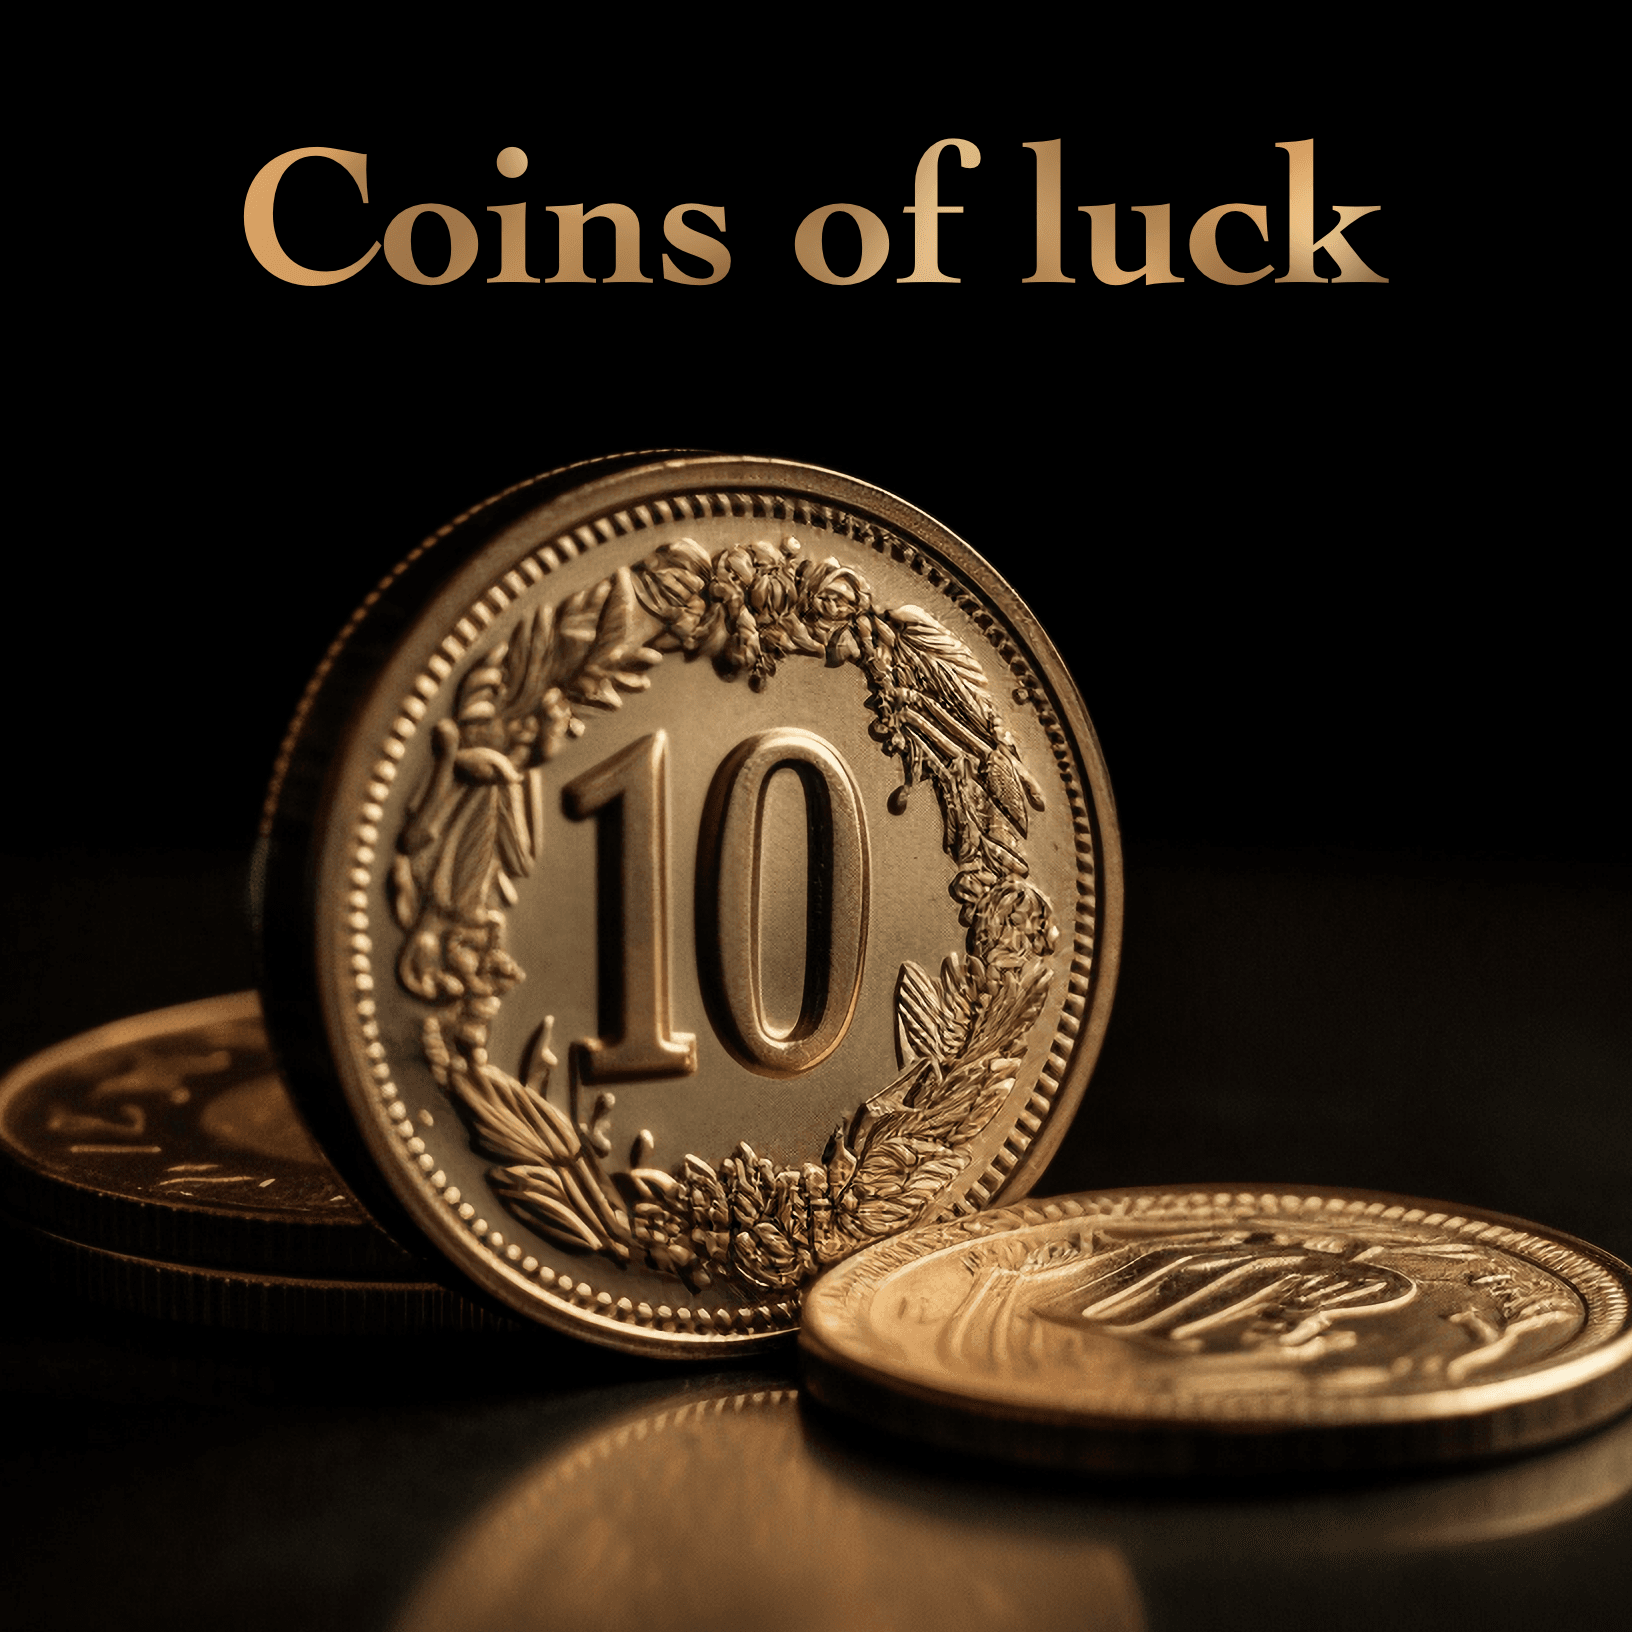 Coins of luck NFT cruzo